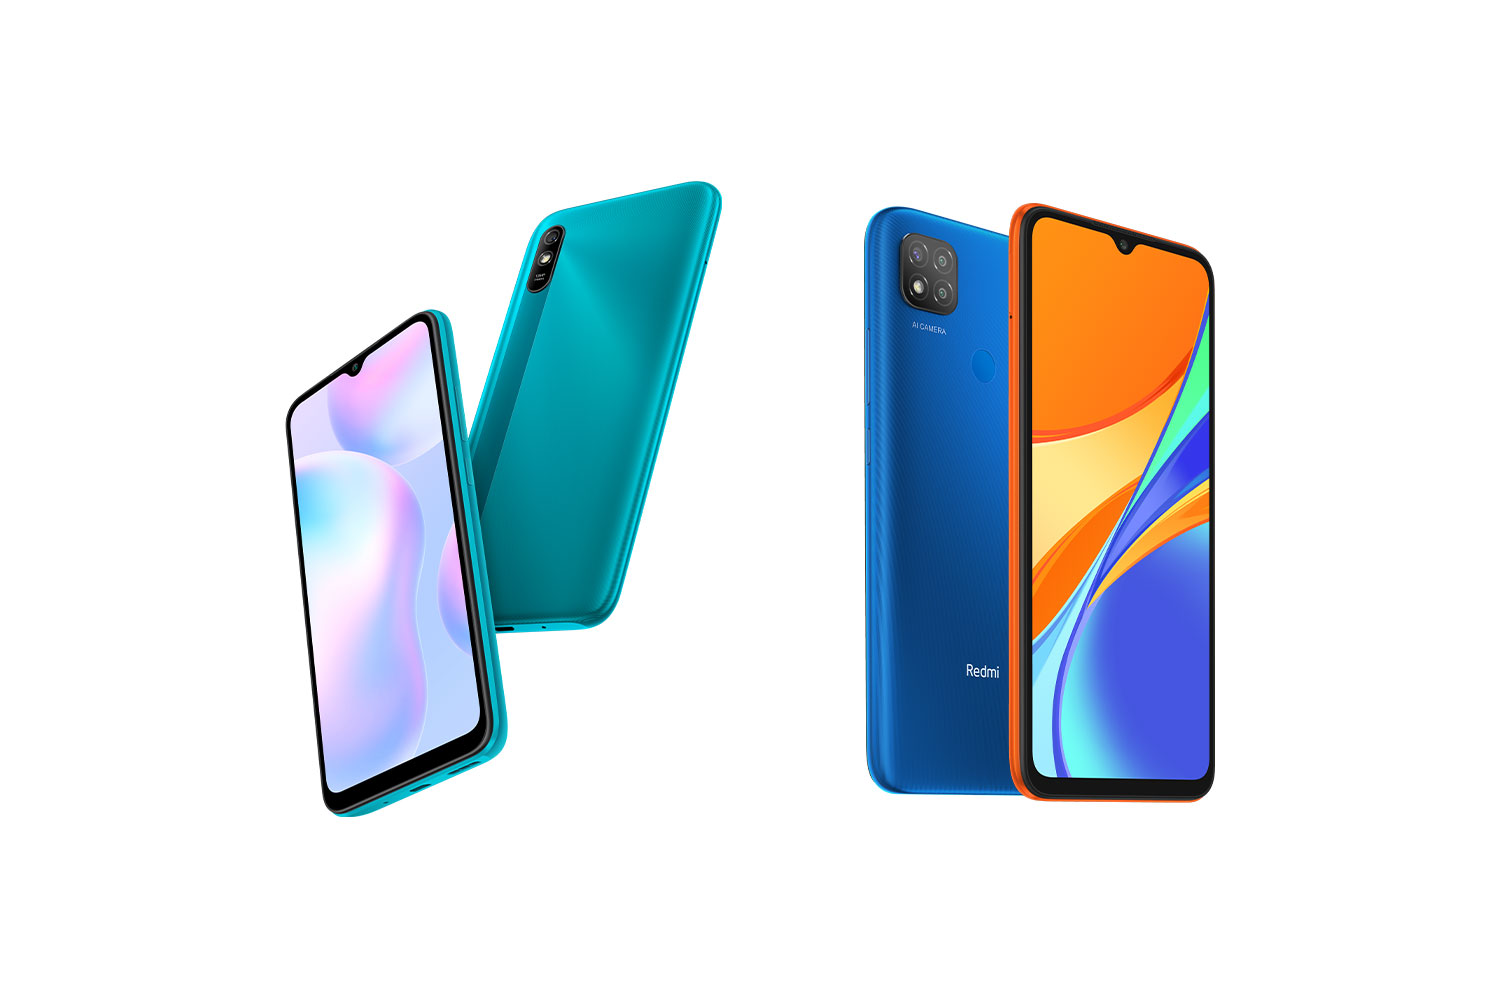 Redmi 9A and 9C